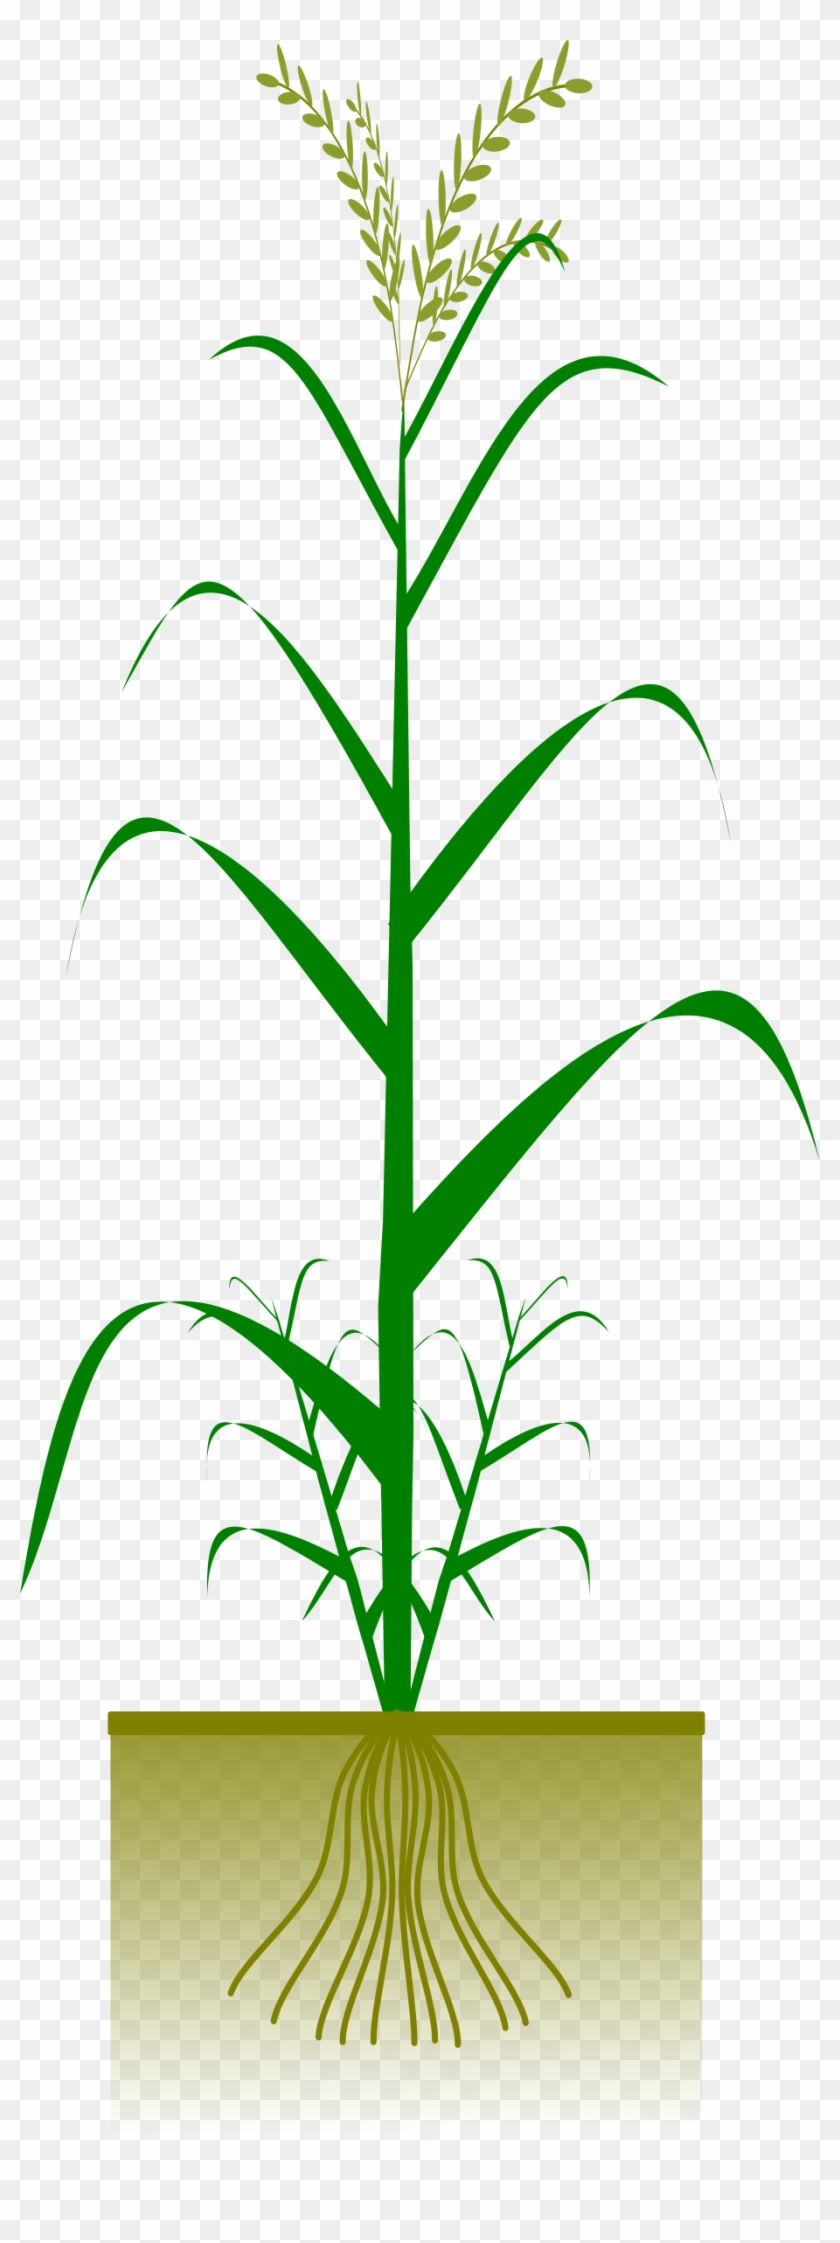 This Free Icons Png Design Of Cereal Plant Clipart #181564